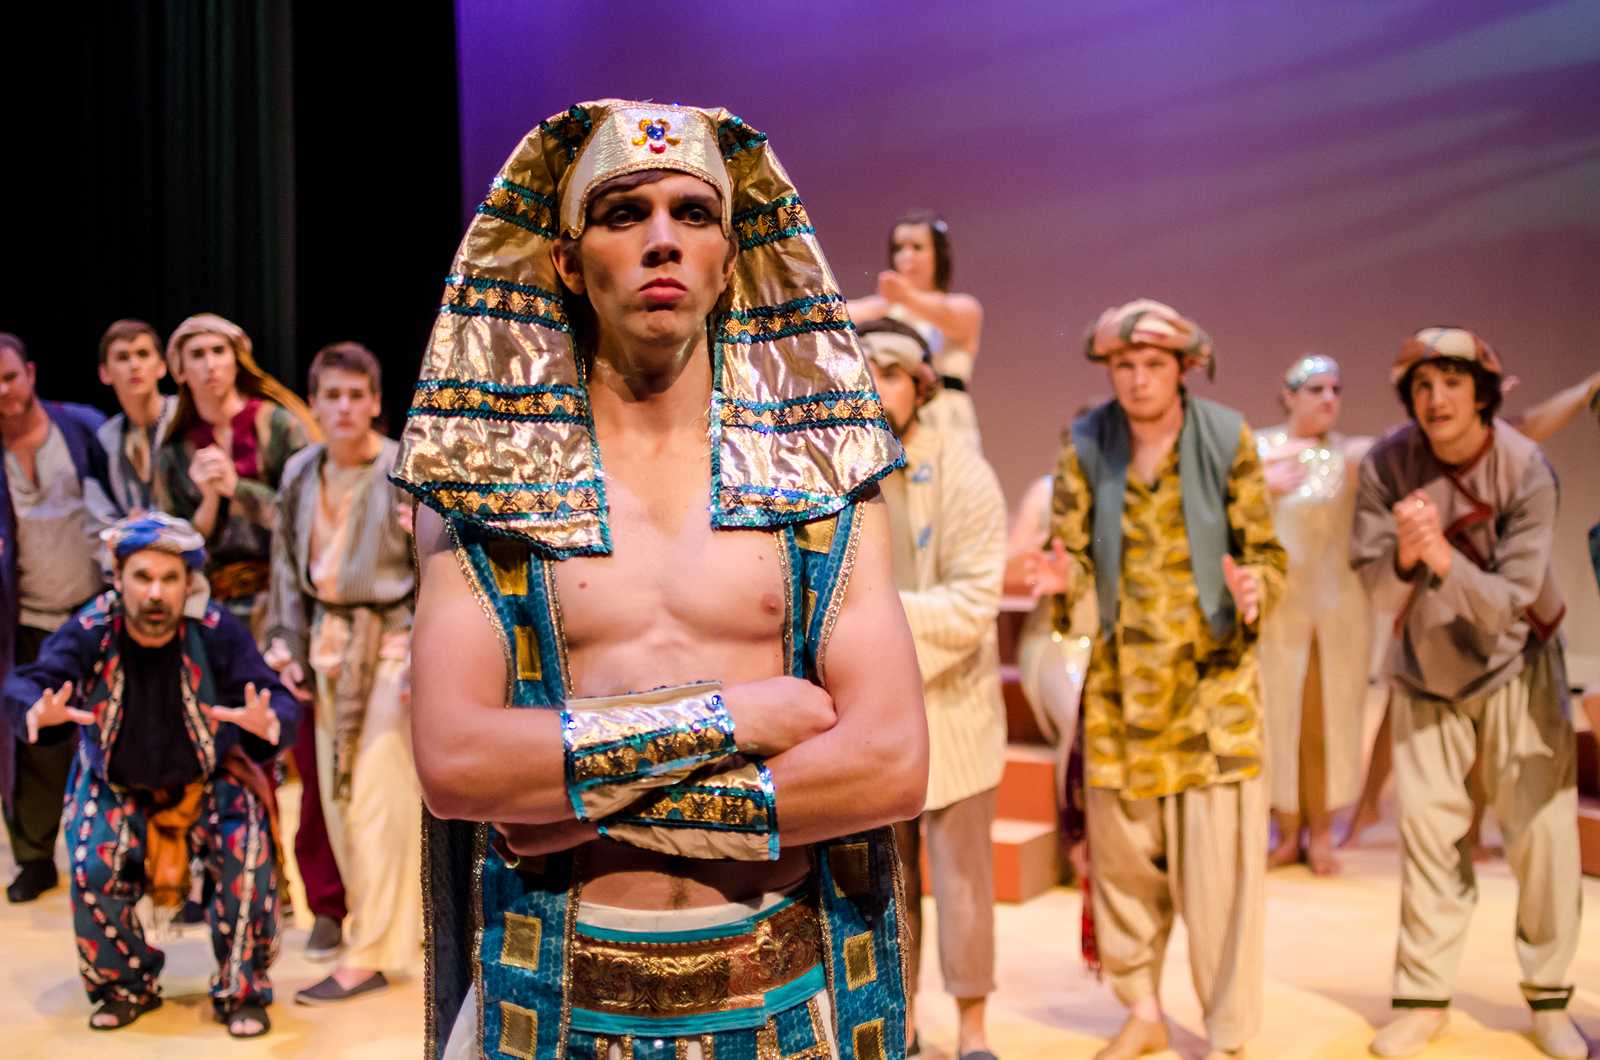 Joseph, a young man wearing the costume of an Egyptian pharoah, crosses his arms and stares out towards the camera with a determined expression. A group of men who are mostly his brothers, all wearing Egyptian clothing, are arrayed in pleading positions behind him.